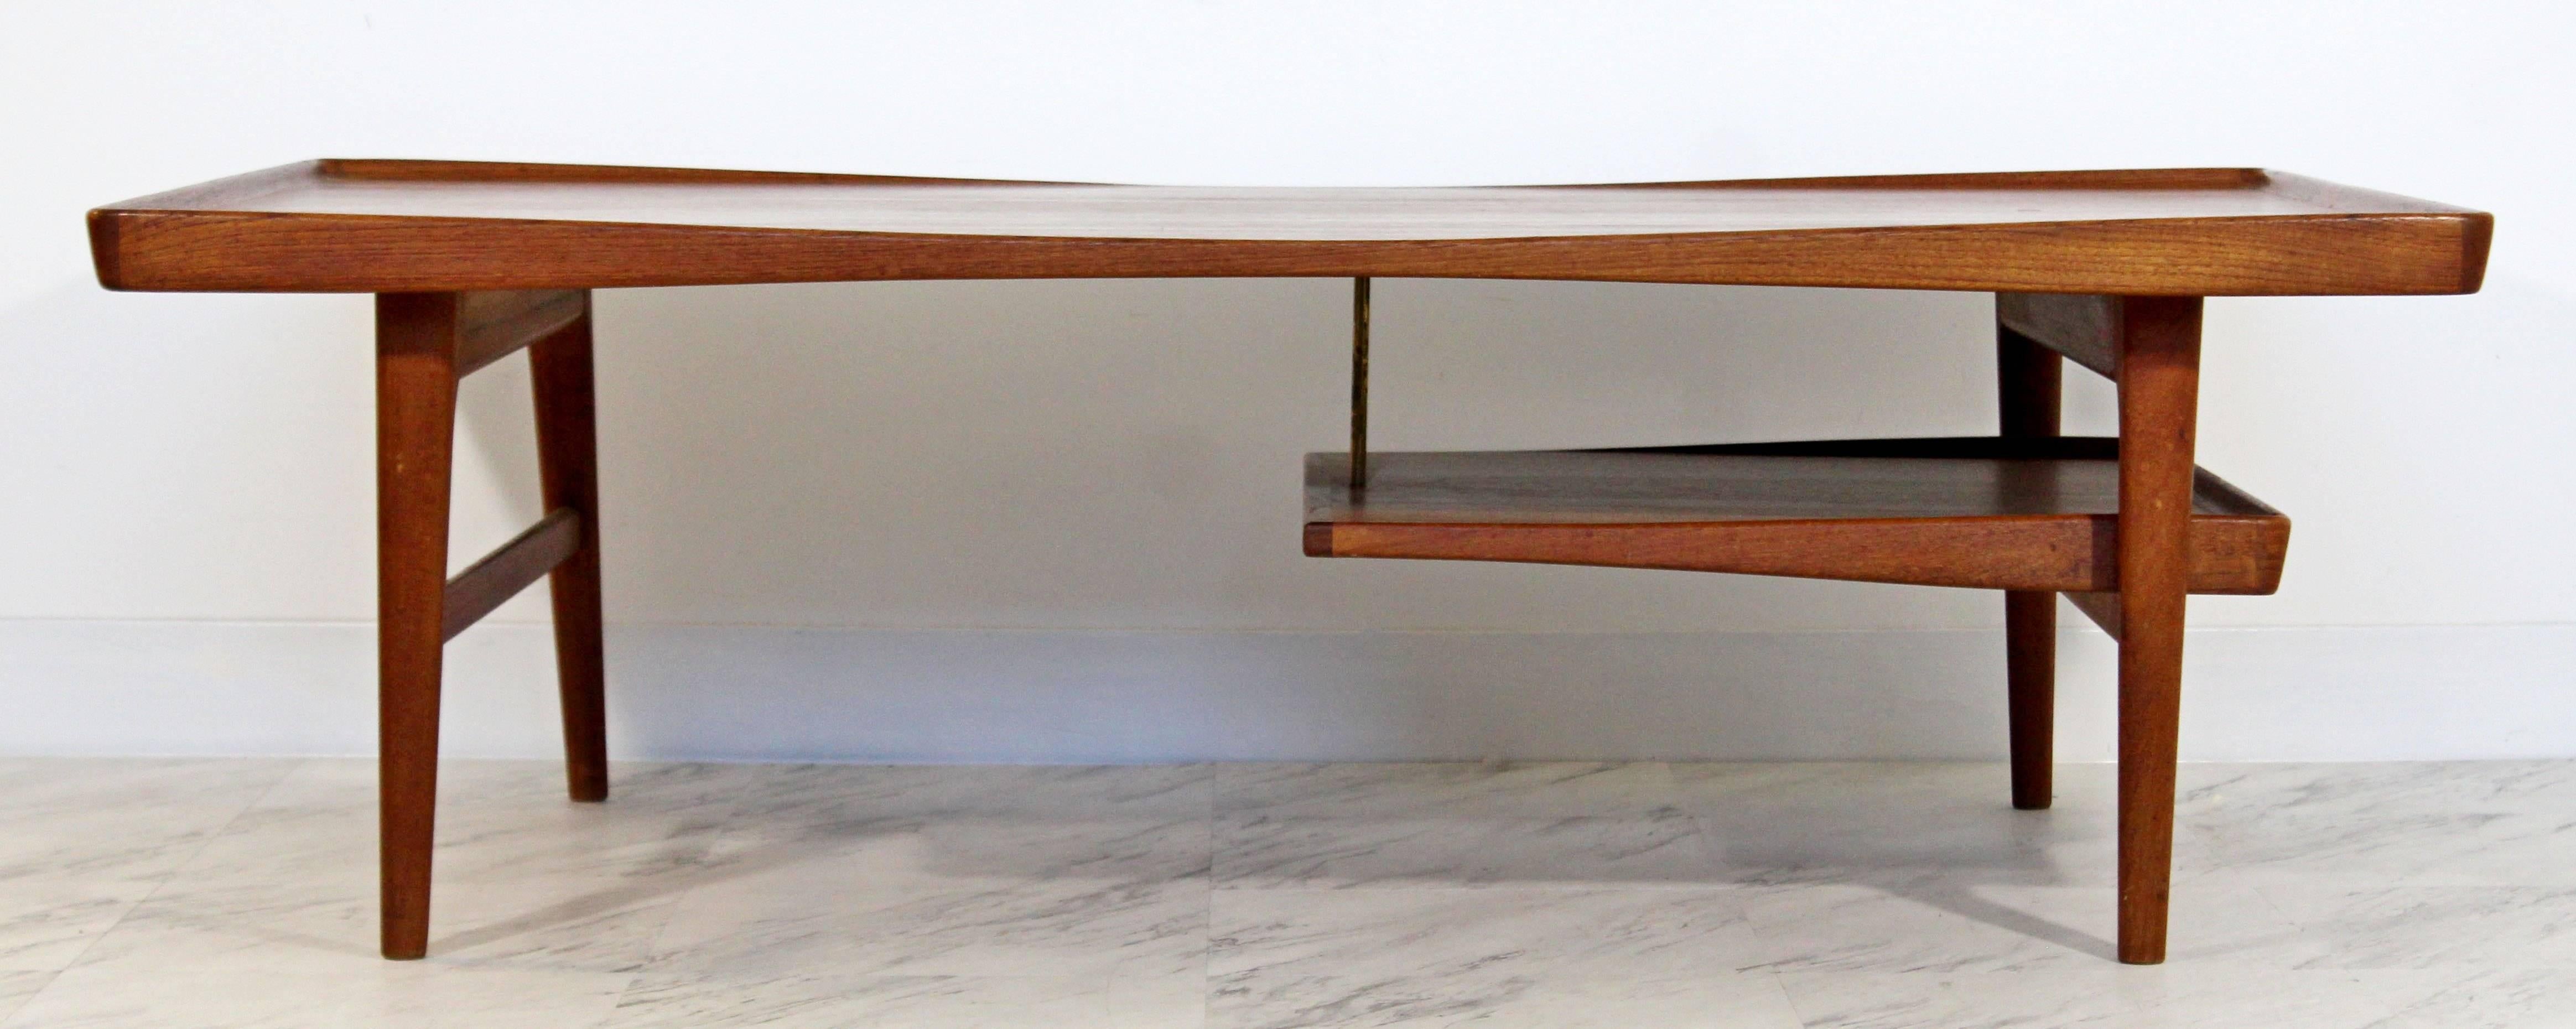 For your consideration is a magnificent, teak, coffee table, with a shelf, by Danish company Selig by Poul Jensen, circa 1960s. In excellent condition. The dimensions are 50